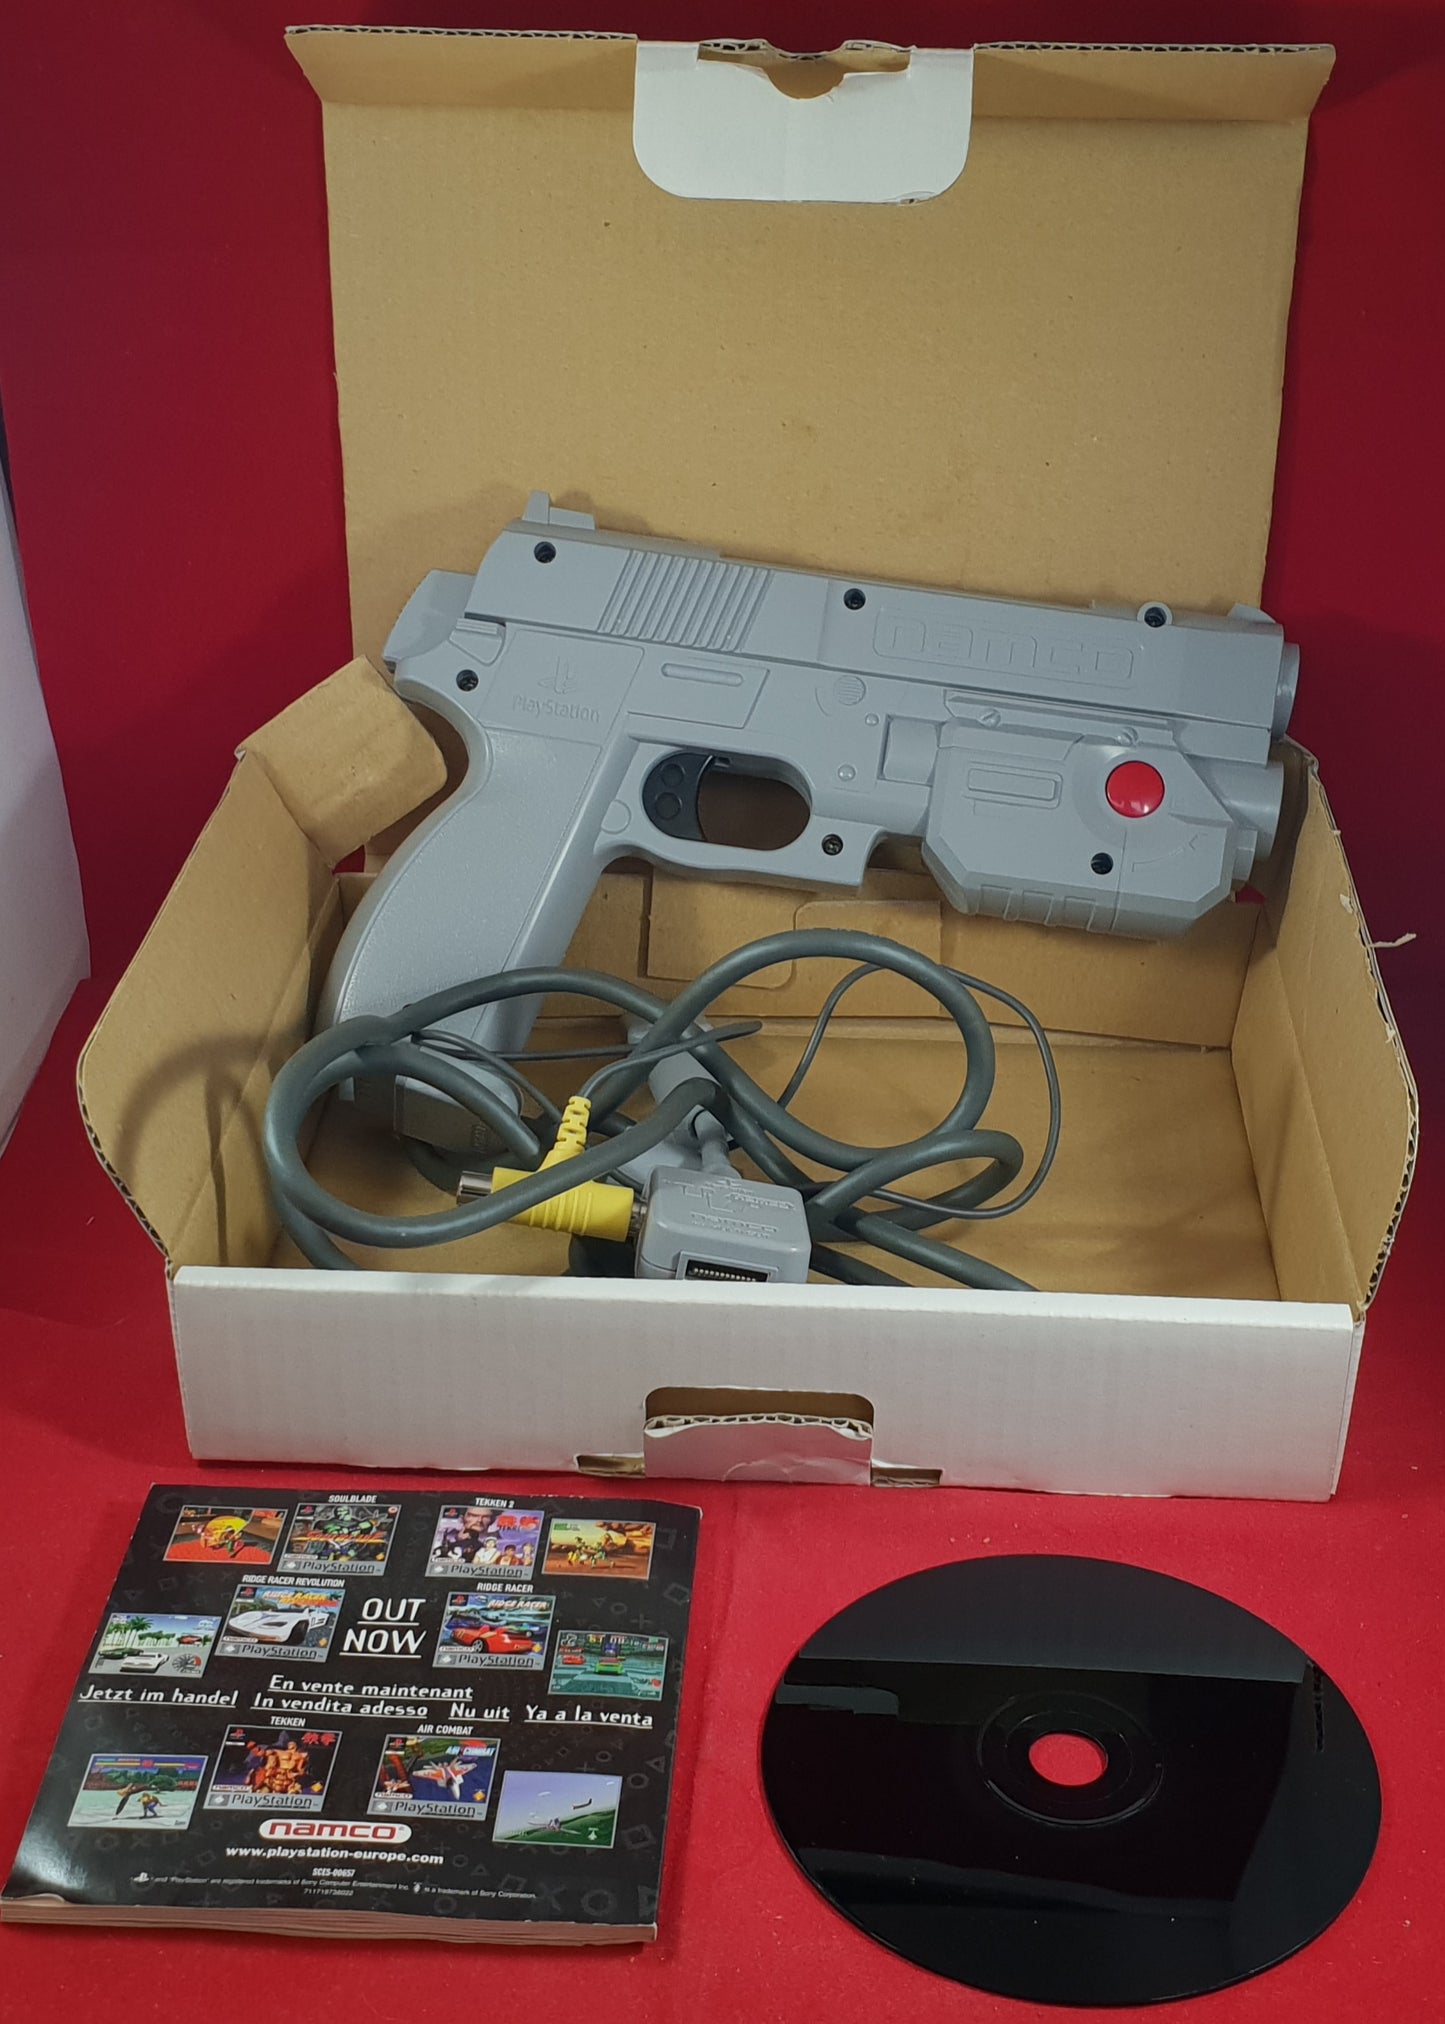 Namco G-Con 45 Light Gun Accessory with Time Crisis Game includes adaptor Sony Playstation 1 (PS1)